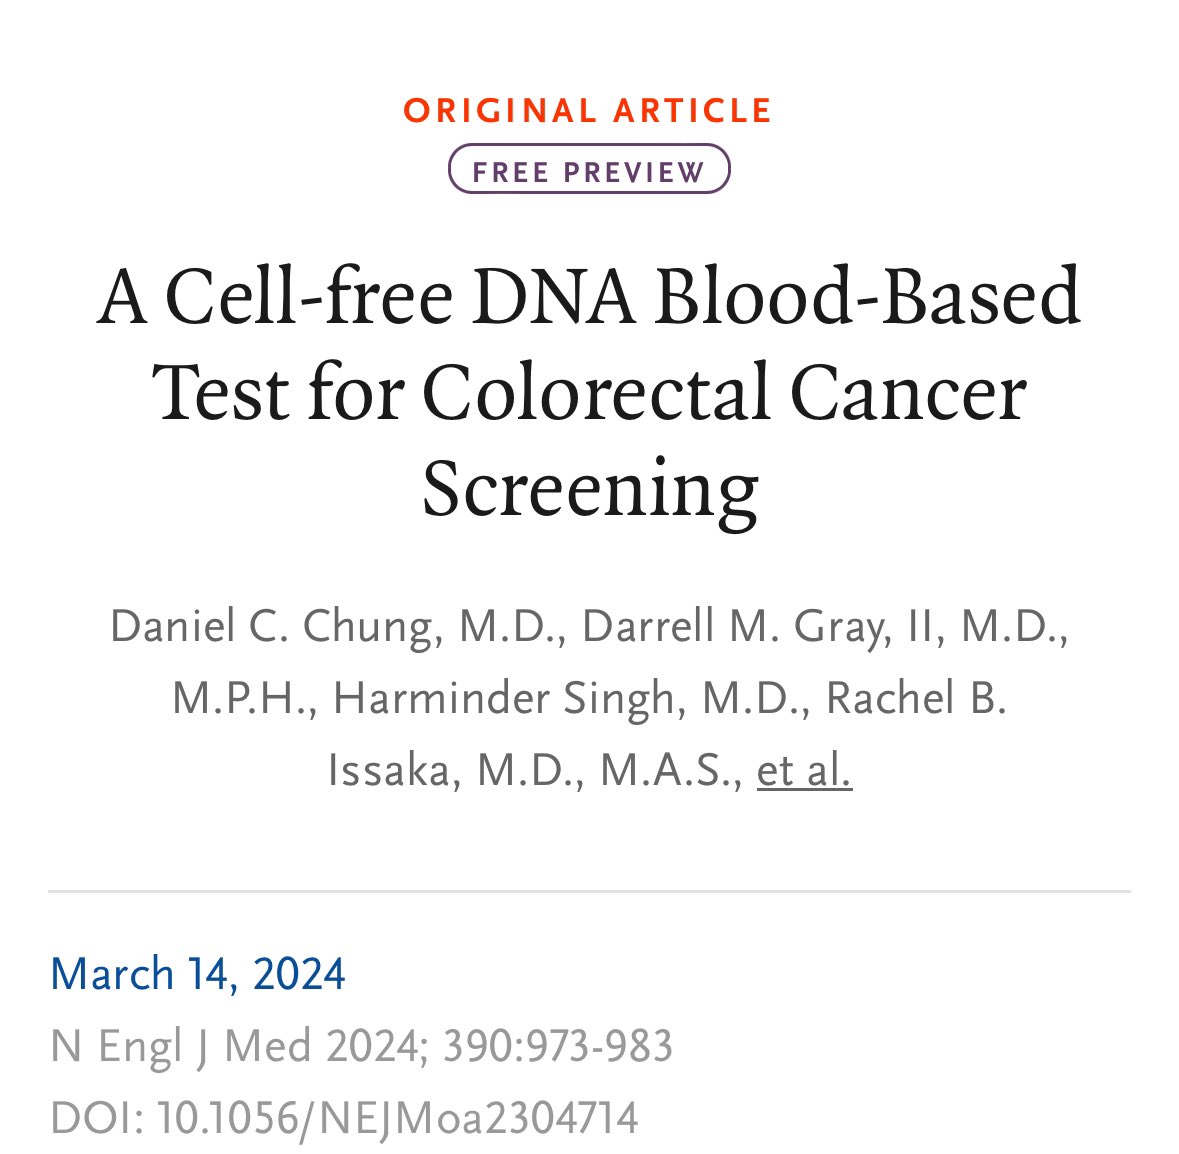 🚨 A blood based cell free DNA test is able to detect colorectal cancer with 83% sensitivity and advanced neoplastic lesions with 90% specificity 

nejm.org/doi/full/10.10…

@dr_yakupergun @theliverdr @NEJM @OncoAlert #MedX #ColorectalCancerAwarenessMonth @LiquidBioTeam